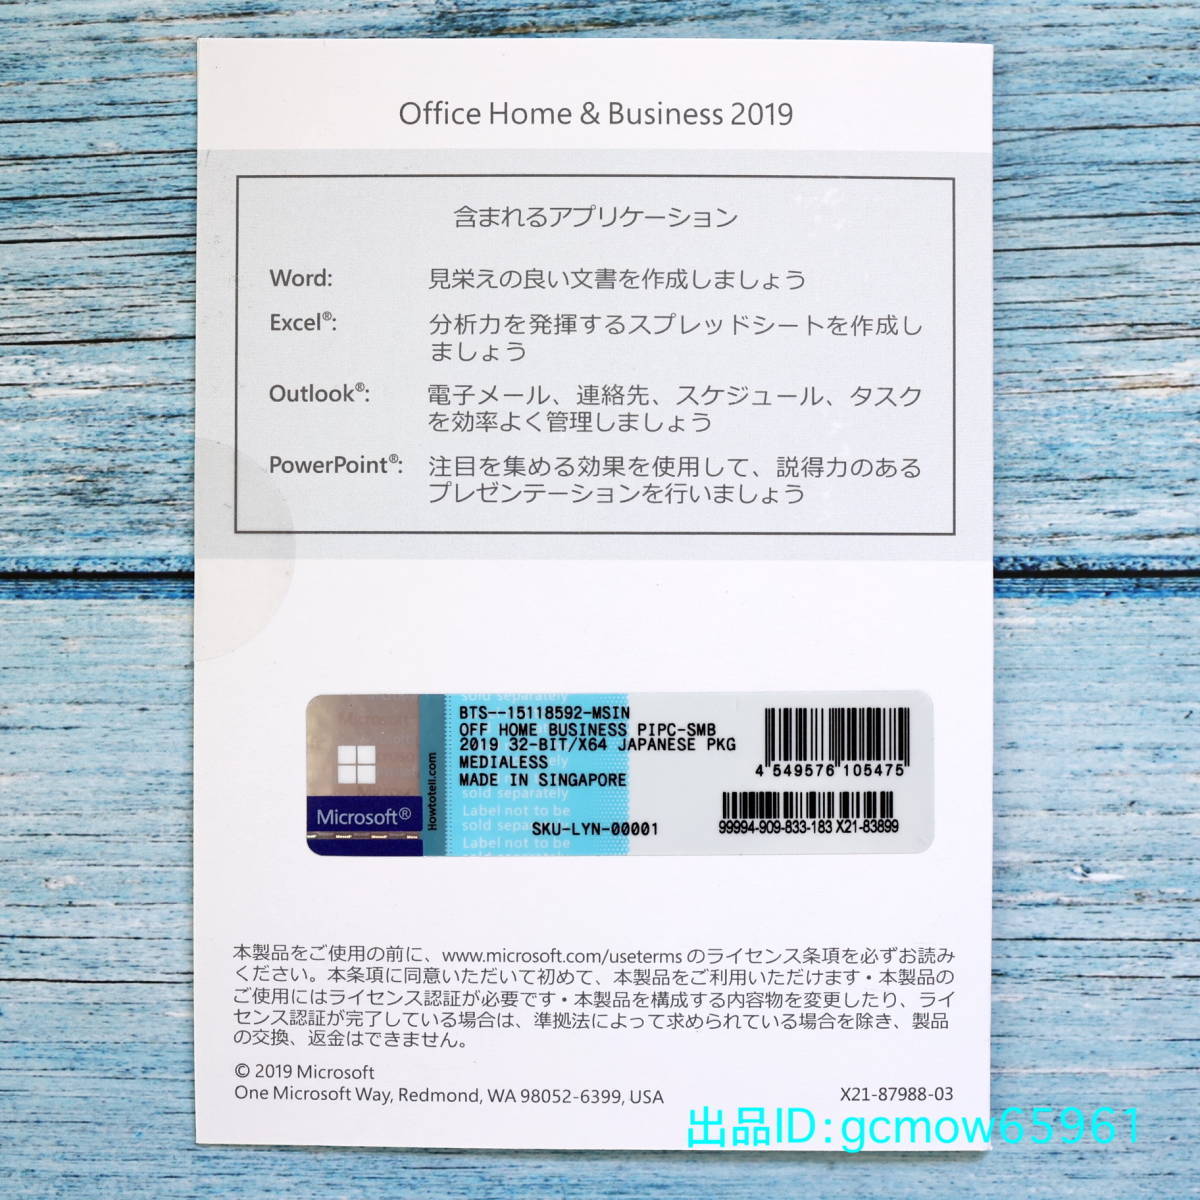 Microsoft Office Home & Business 2019lPOSA card version l private person account registration type Pro duct key l.. version l certification guarantee l unused unopened 